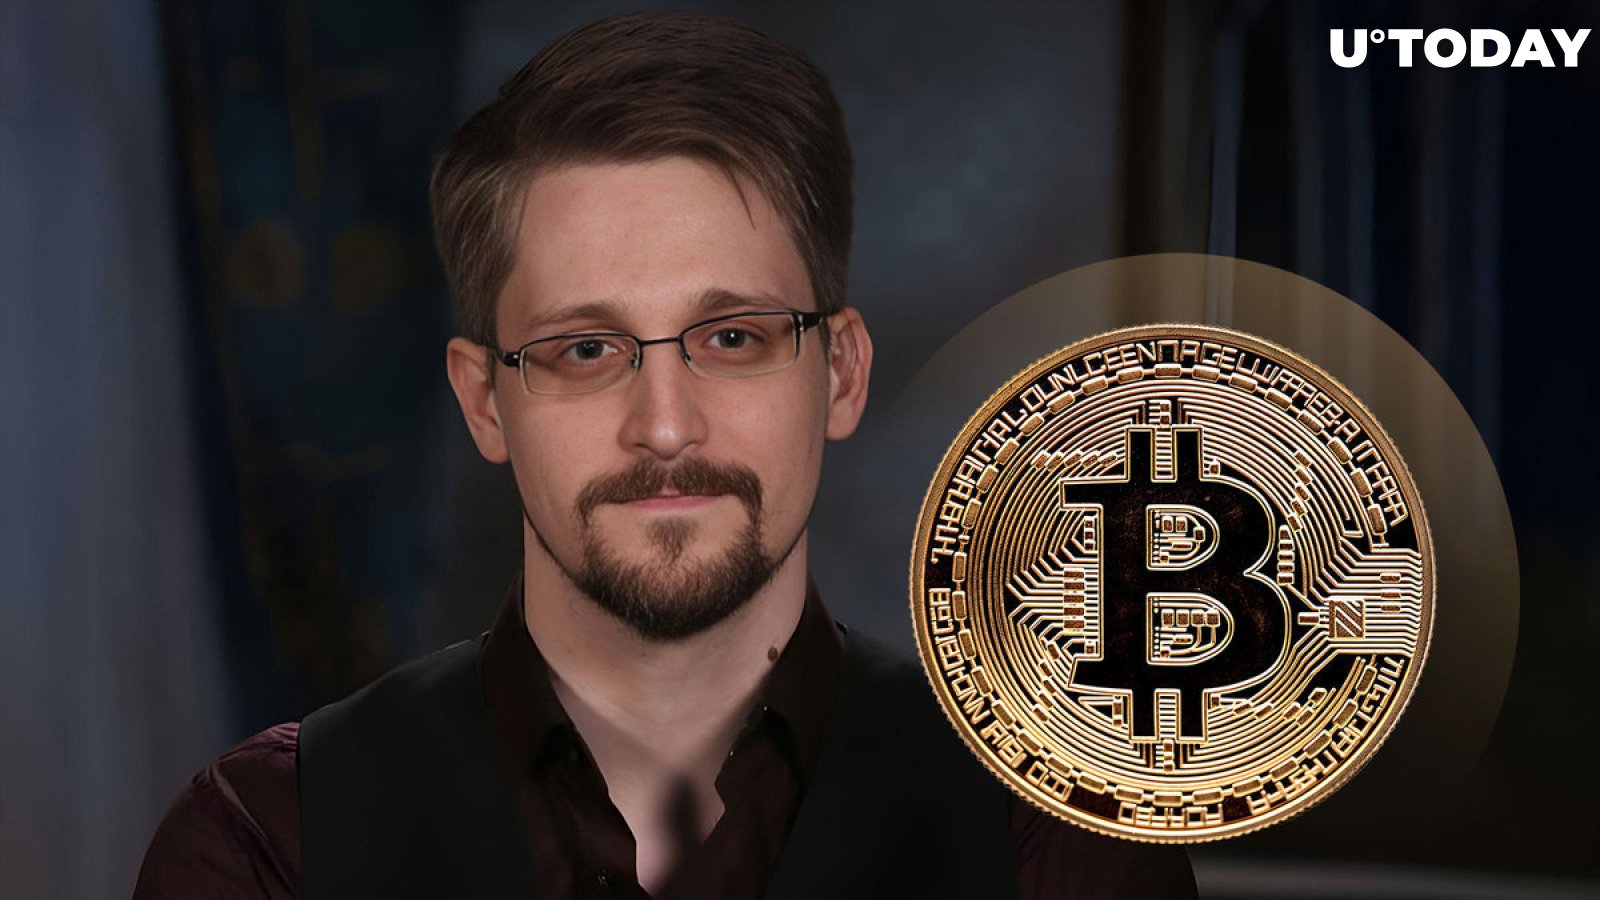 Edward Snowden Predicts Nations Joining Bitcoin in 